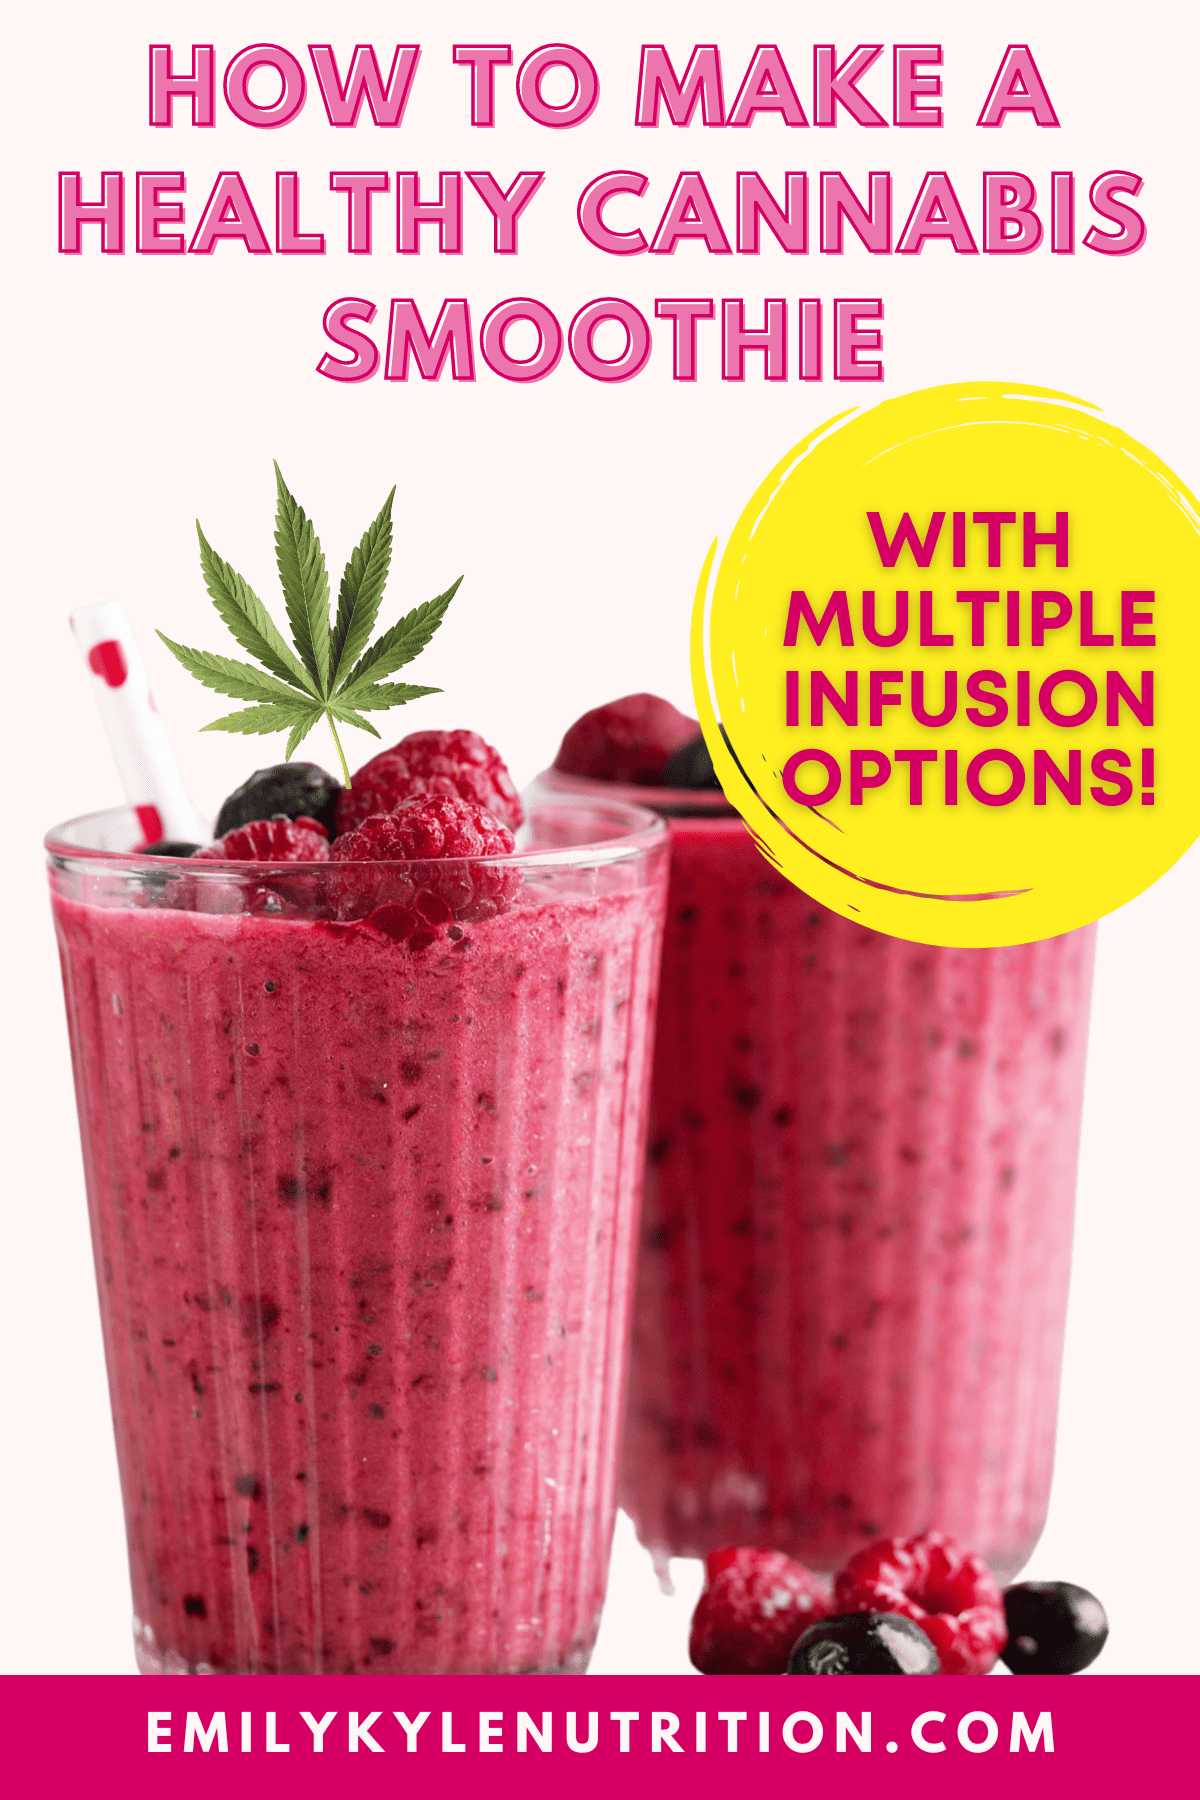 A picture of a cannabis smoothie with text that says how to make a healthy cannabis smoothie. 